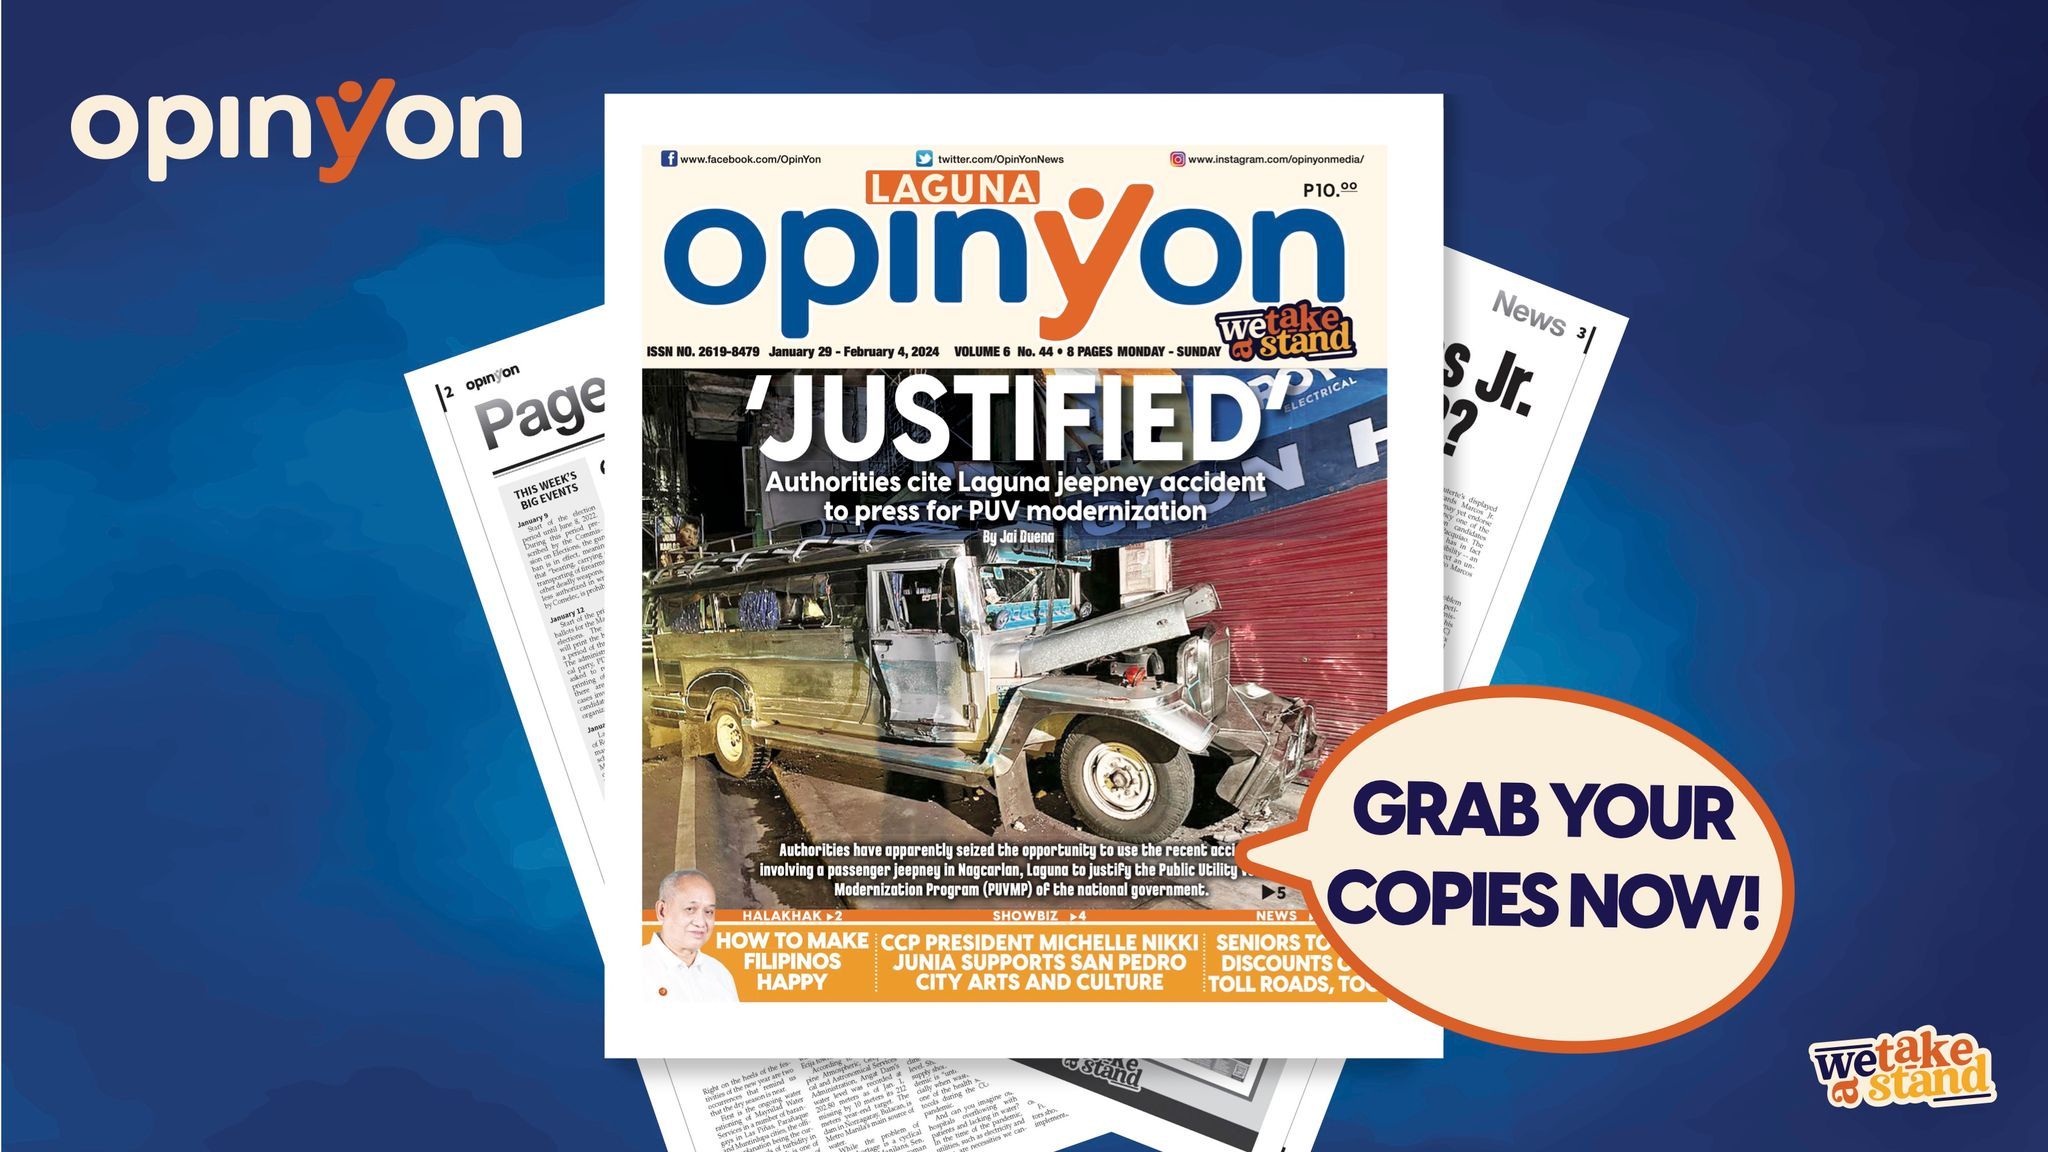 ‘JUSTIFIED’ Authorities cite Laguna jeepney accident to press for PUV modernization